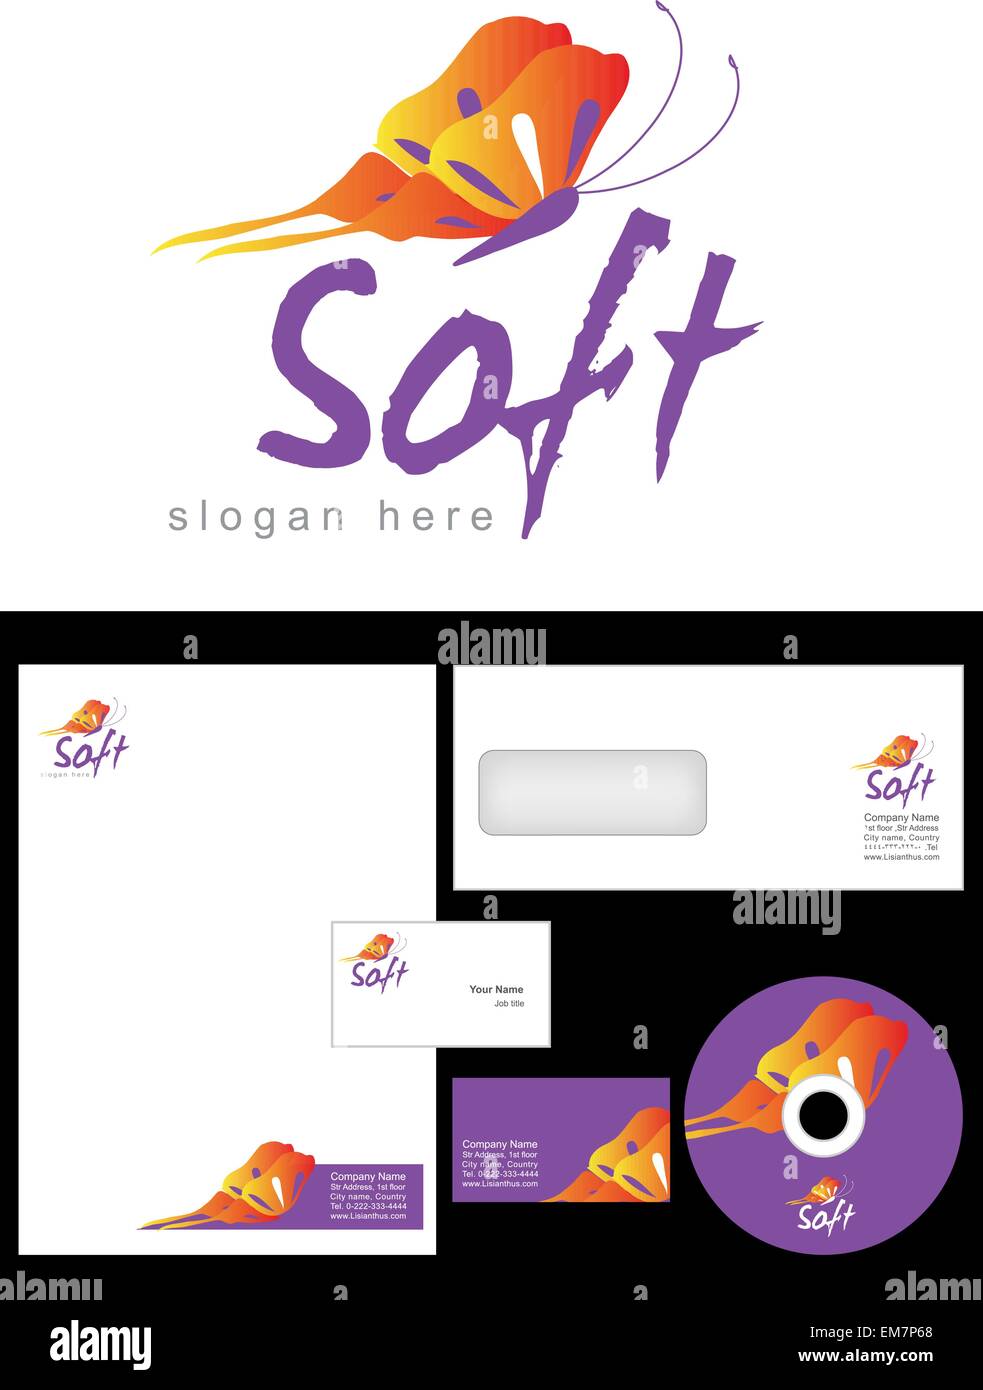 Soft Logo Design and corporate identity package including logo, letterhead, business card, envelope and cd label. Stock Vector